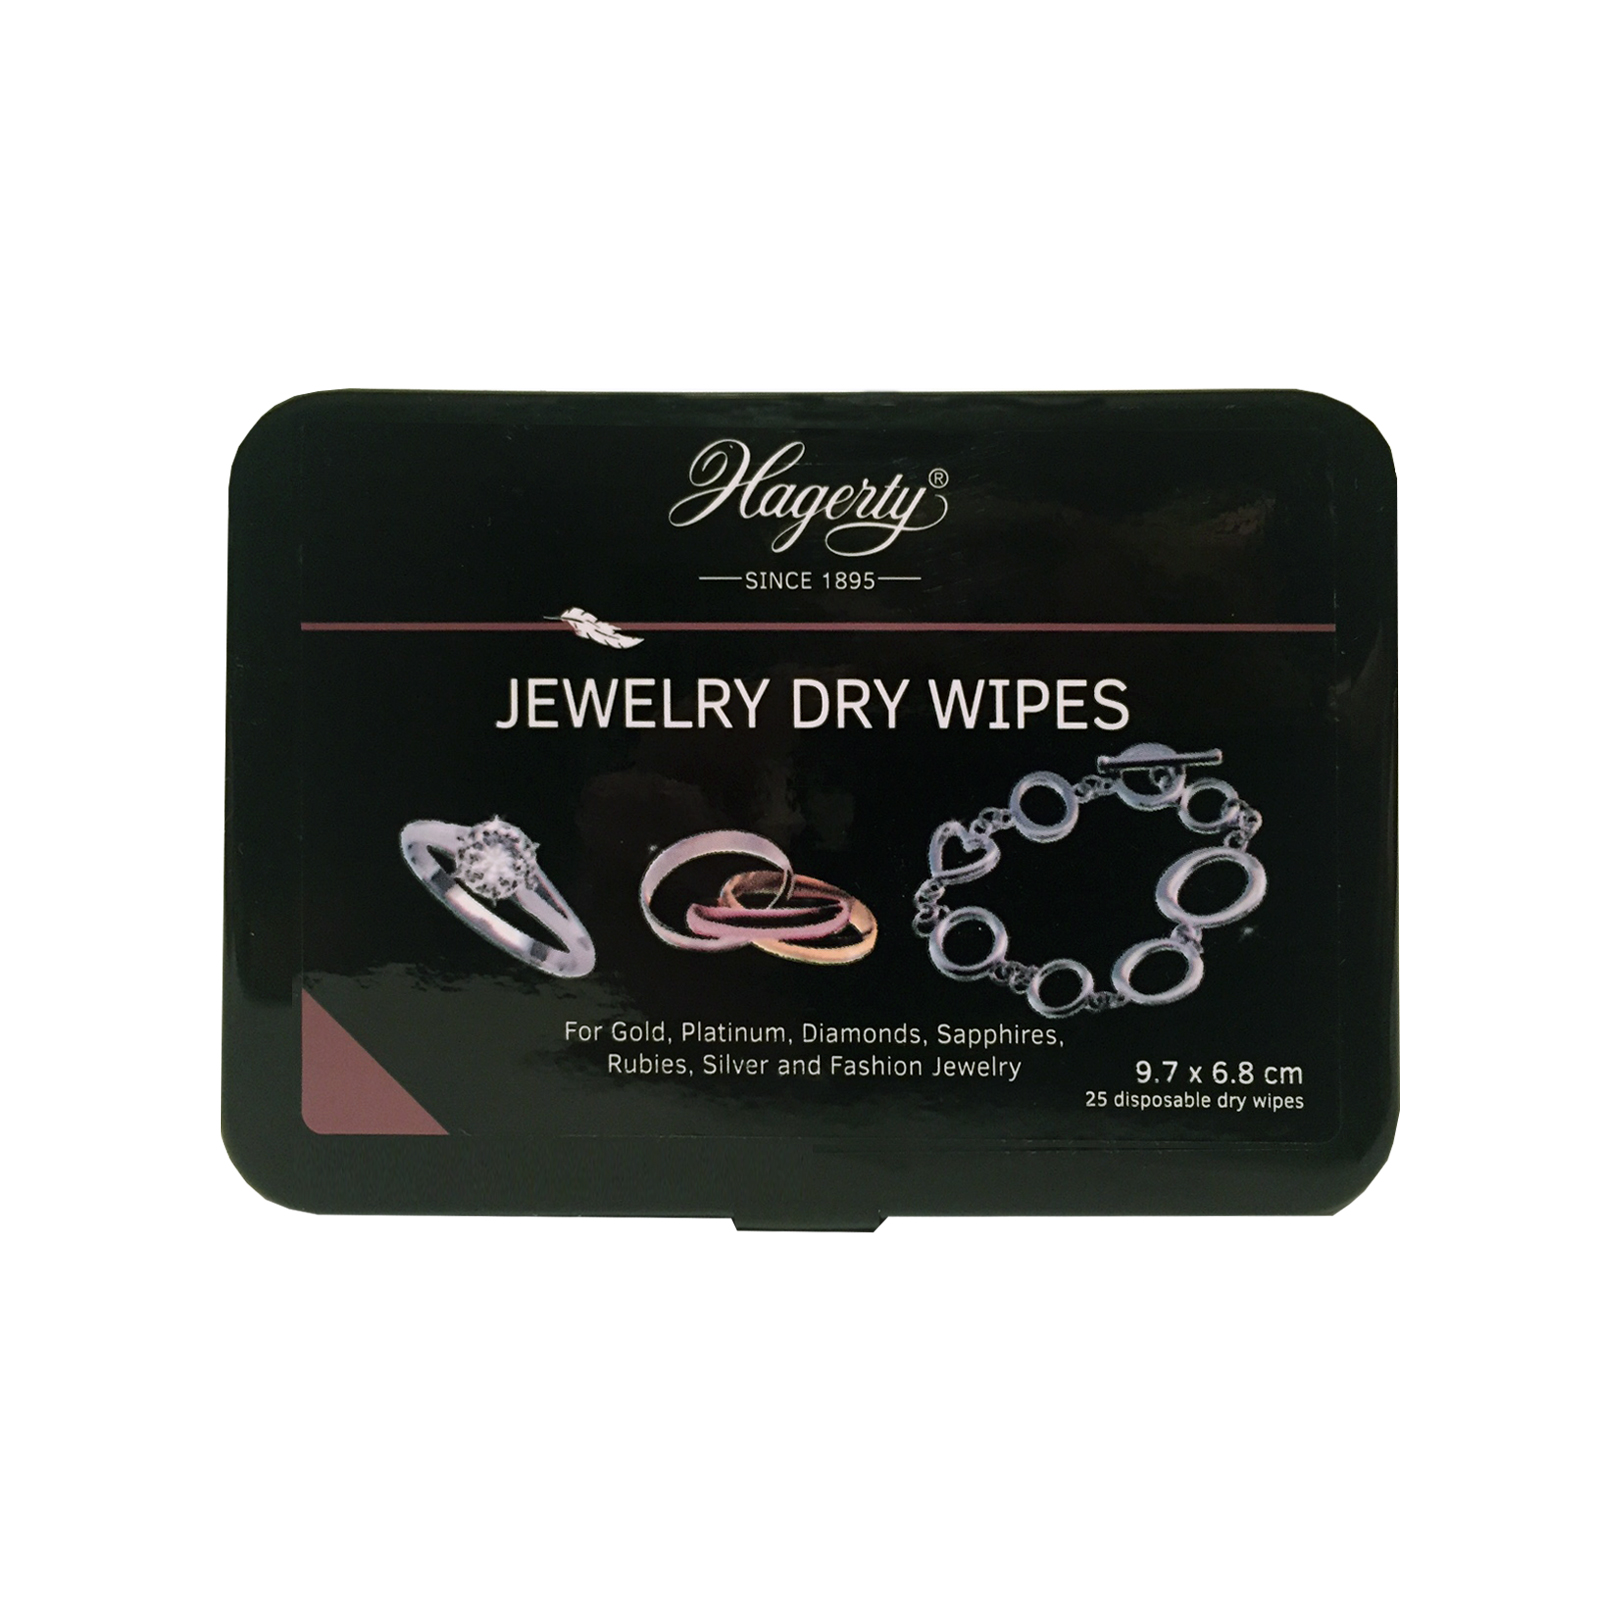 Hagerty Jewel Dry Wipes, 25 lingettes jetables, 97 x 68 mm